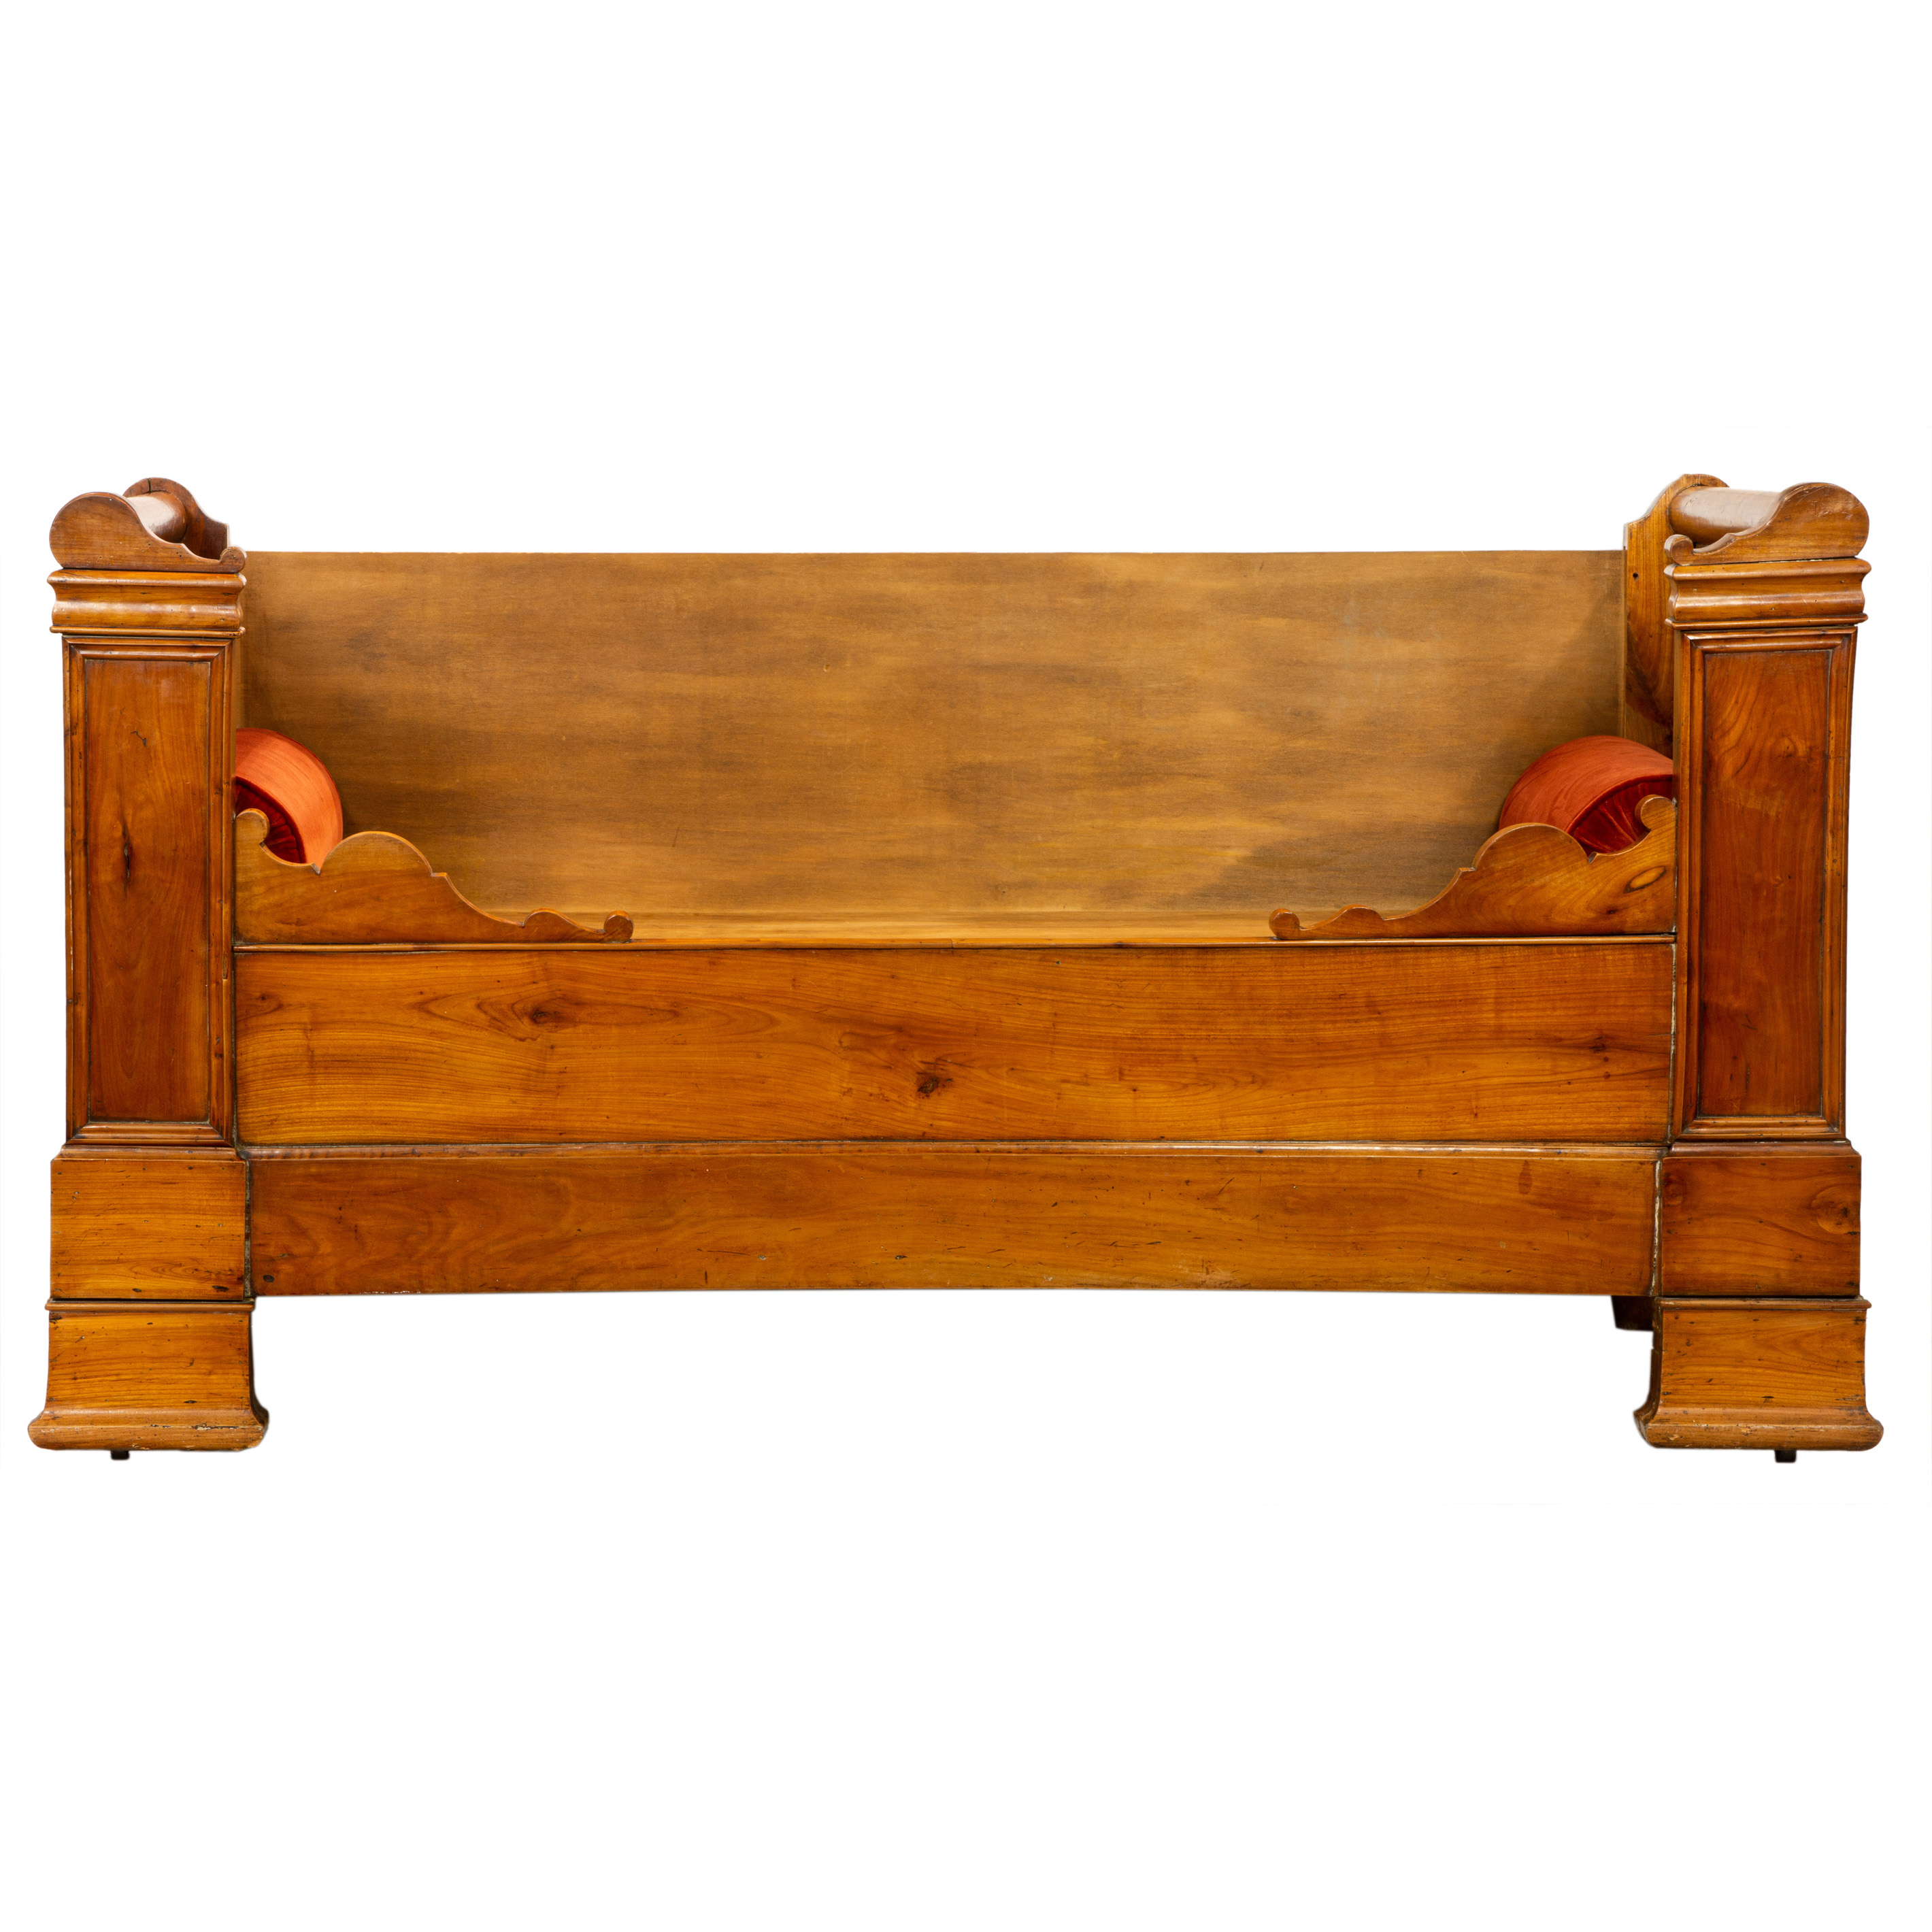 A LOUIS PHILIPPE FRUITWOOD DAYBED 3a3d4e